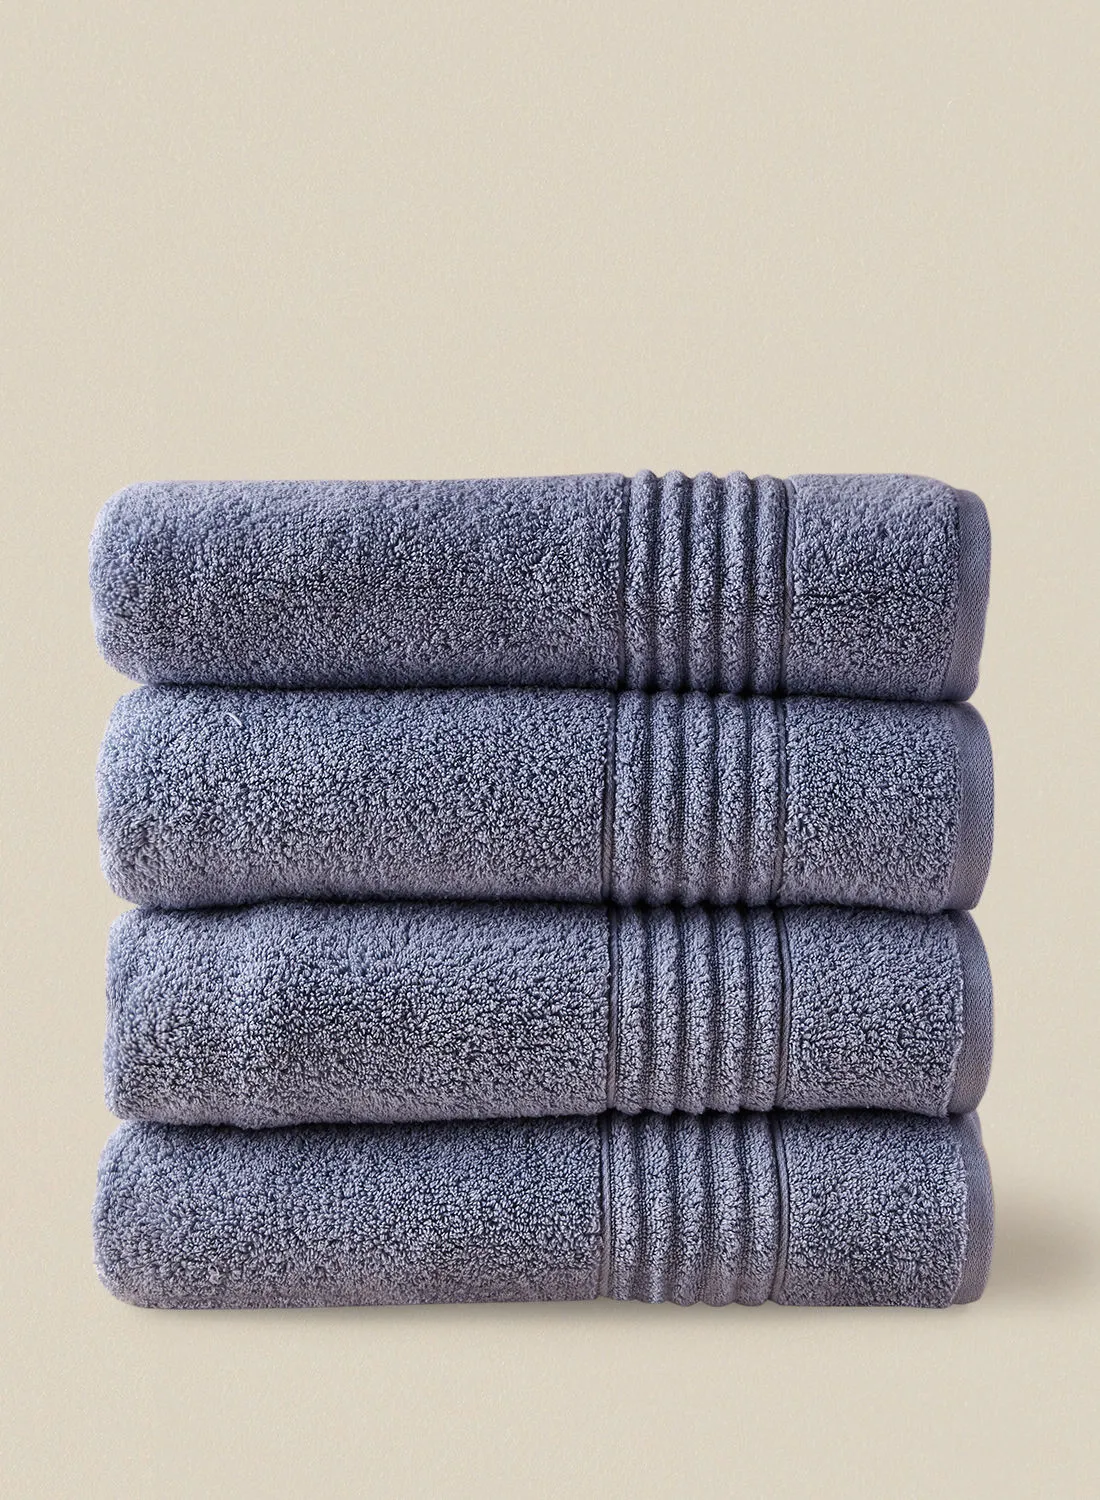 noon east 4 Piece Bathroom Towel Set - 500 GSM 100% Cotton - 4 Bath Towel - Blue Color - Highly Absorbent - Fast Dry